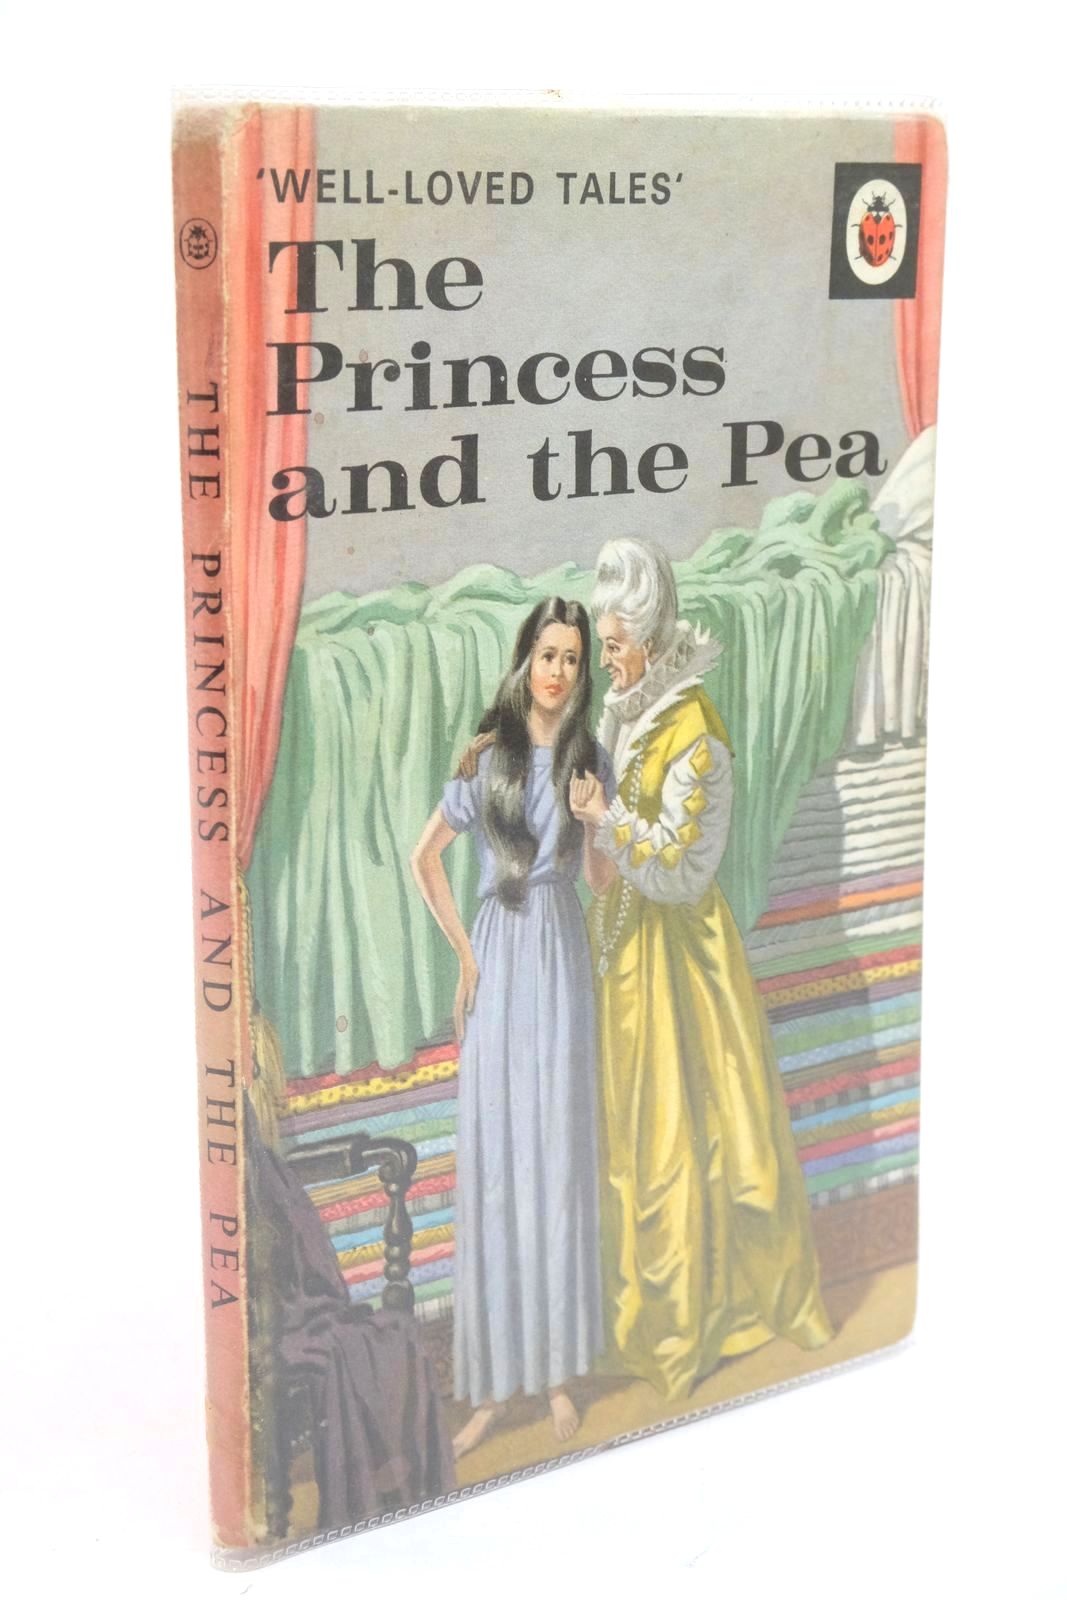 Photo of THE PRINCESS AND THE PEA written by Southgate, Vera illustrated by Winter, Eric published by Wills &amp; Hepworth Ltd. (STOCK CODE: 1322378)  for sale by Stella & Rose's Books